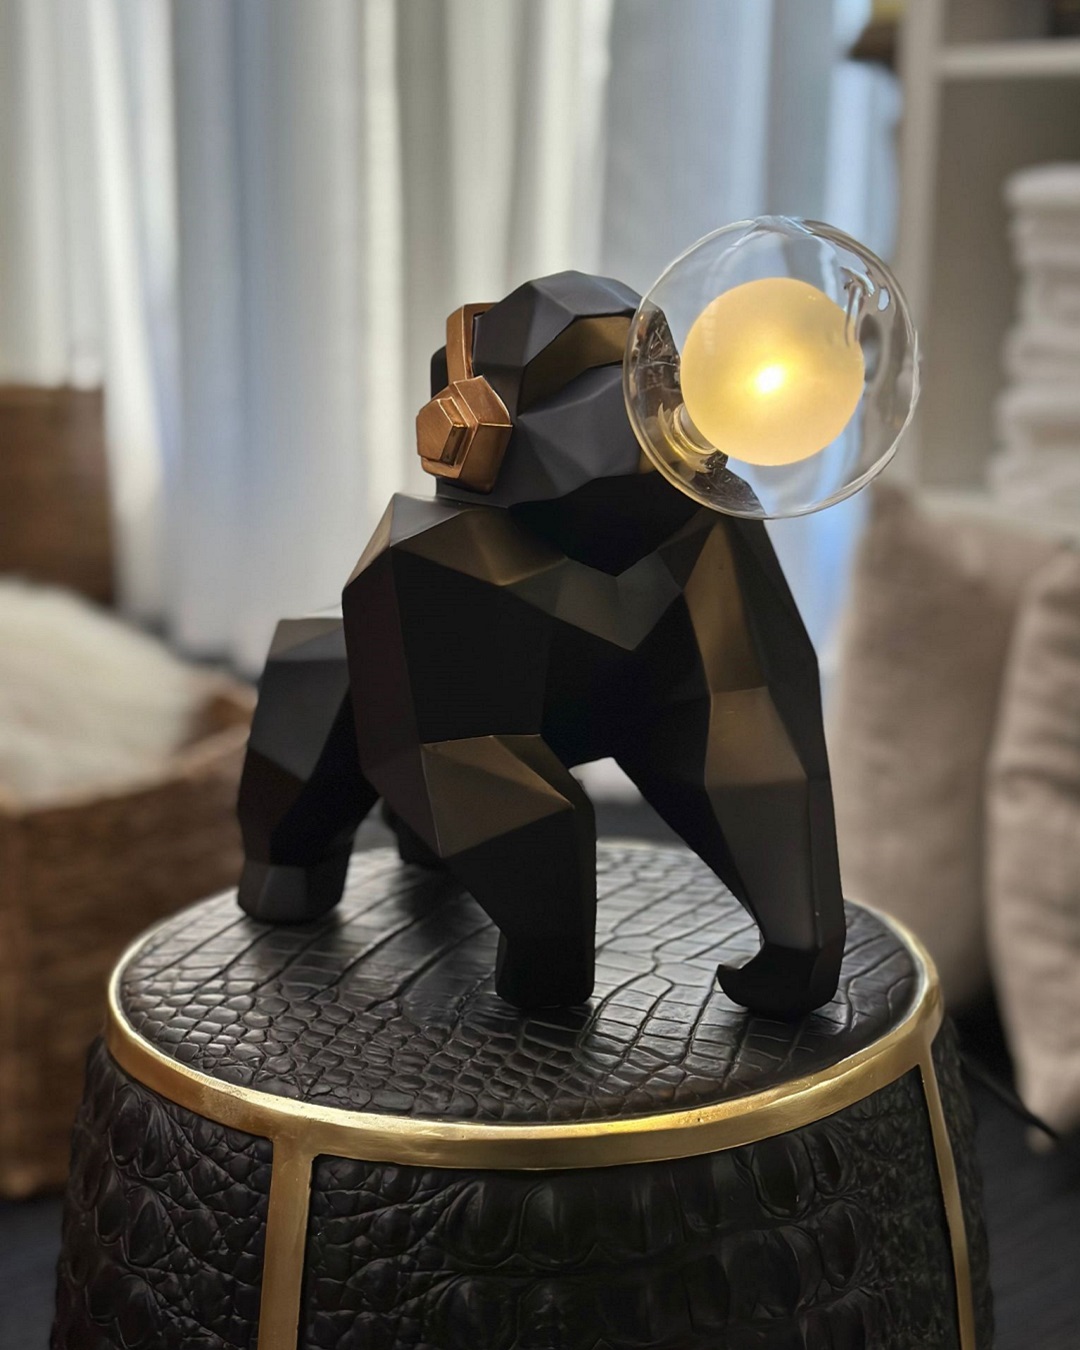 Black gorilla lamp with gold headphones holding a bulb in mouth sitting on black stool